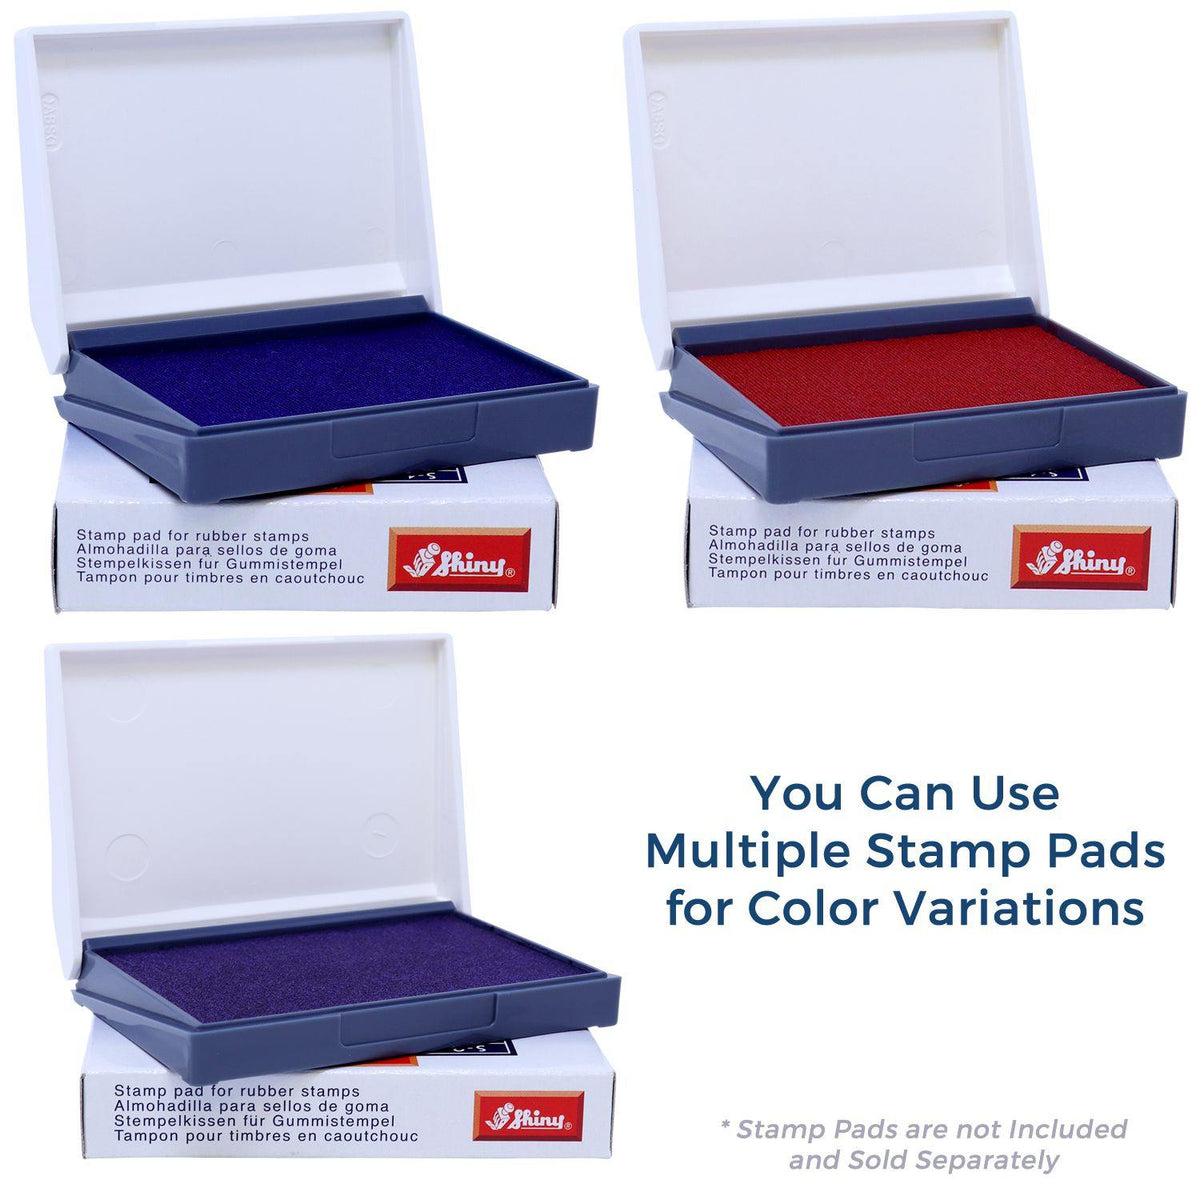 Stamp Pads for Correo Aero Rubber Stamp Available